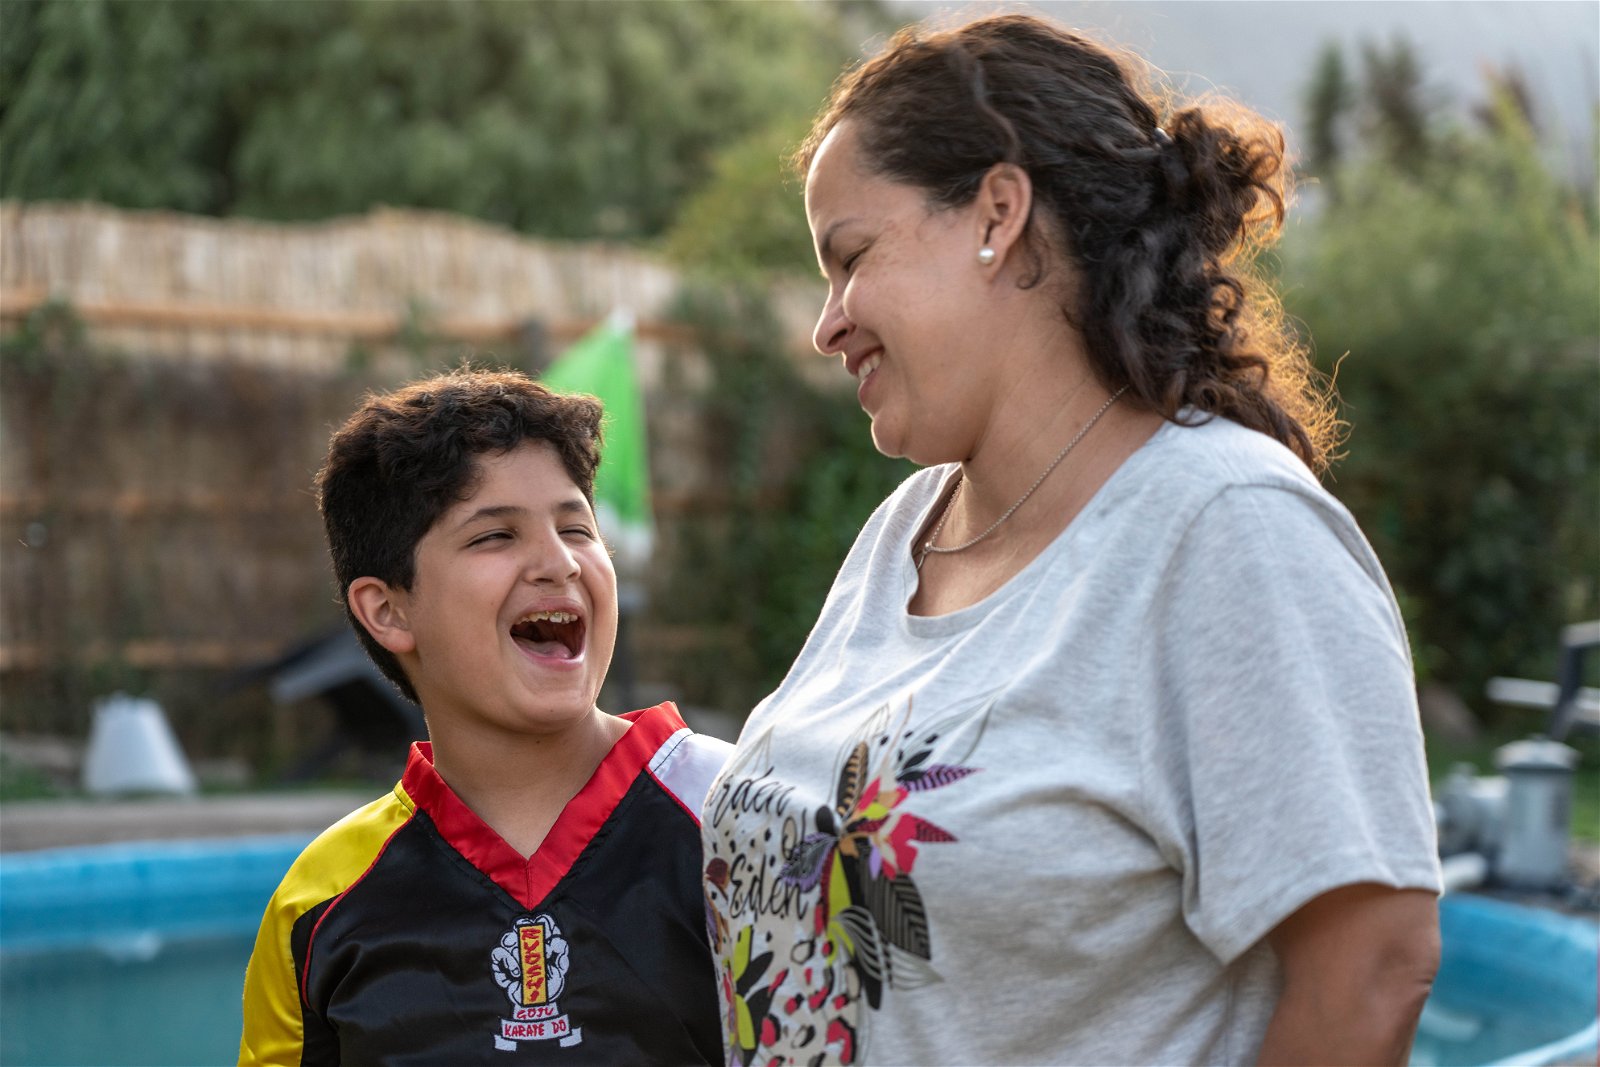 juan laughing with his mouth wide open as his mom stands with him, smiling at him.